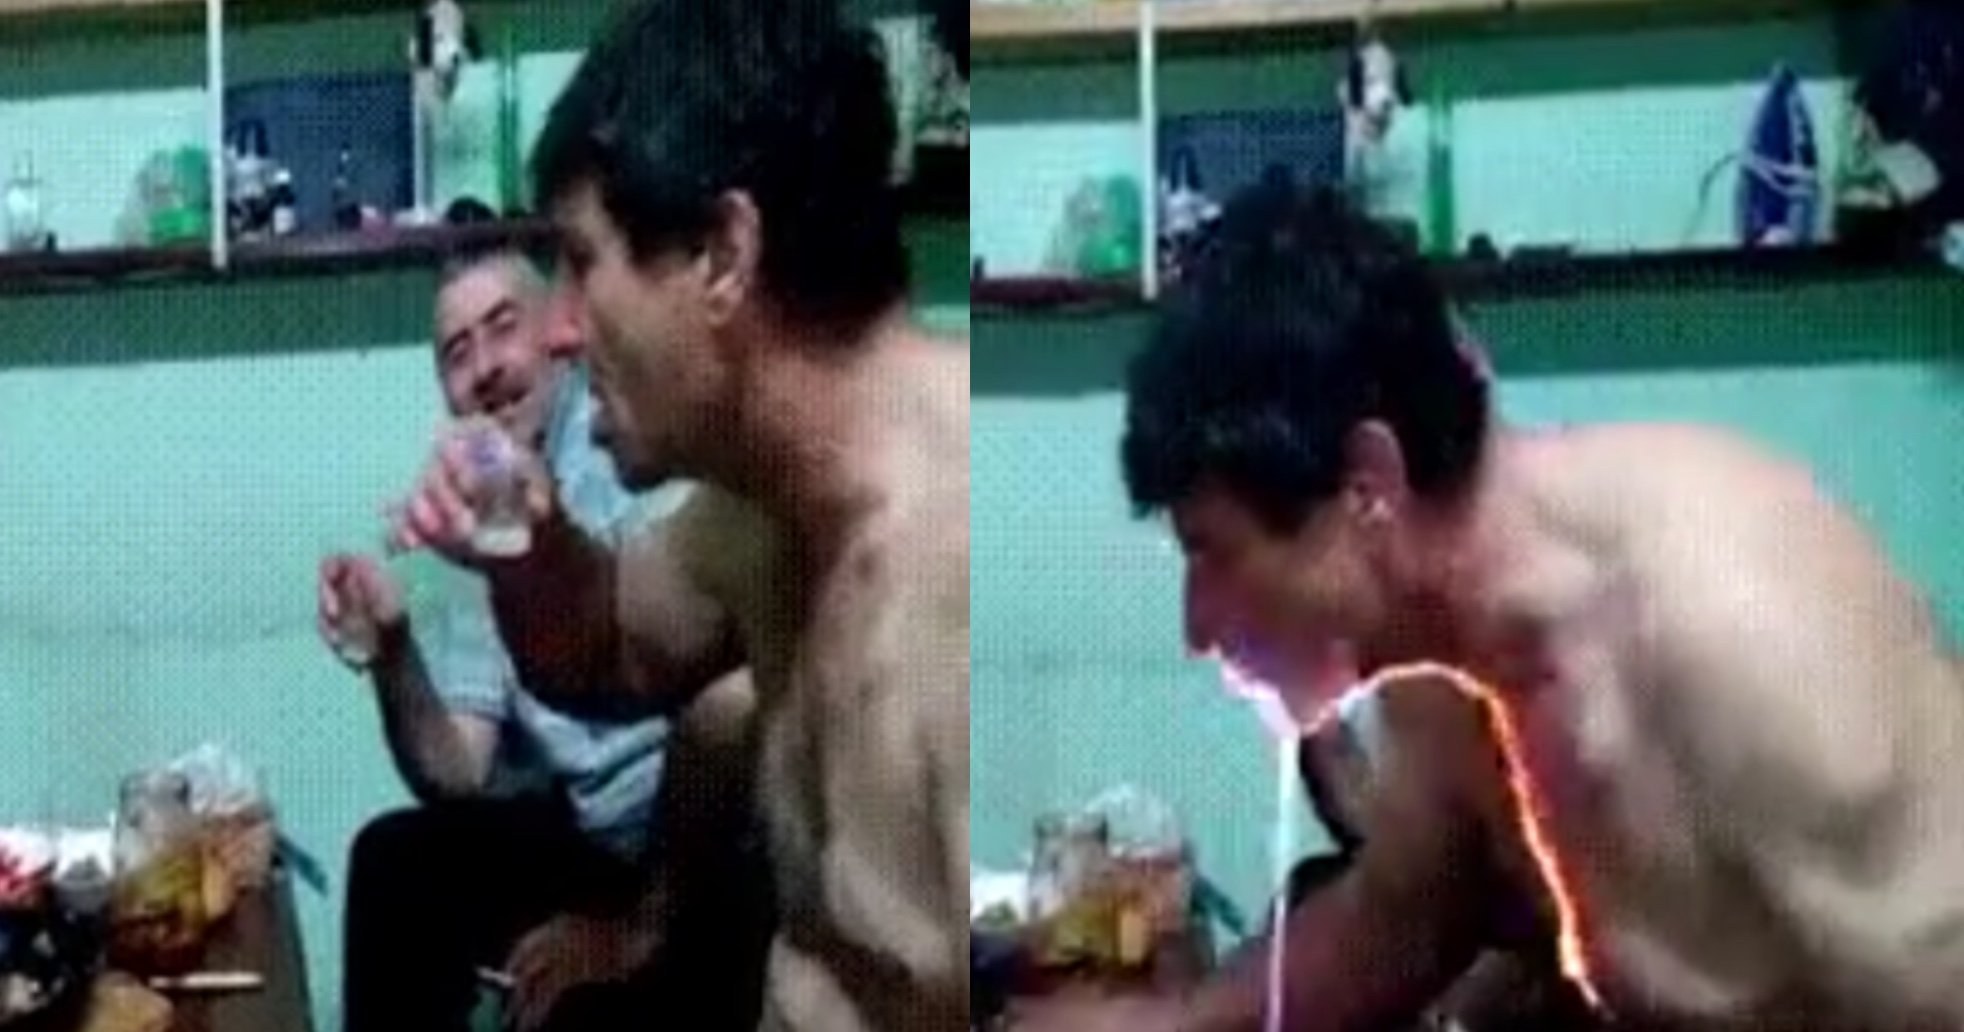 flaming.jpg?resize=412,232 - A Video Of A Man's Throat Burning After Drinking A 96-Percent Alcohol Goes Viral